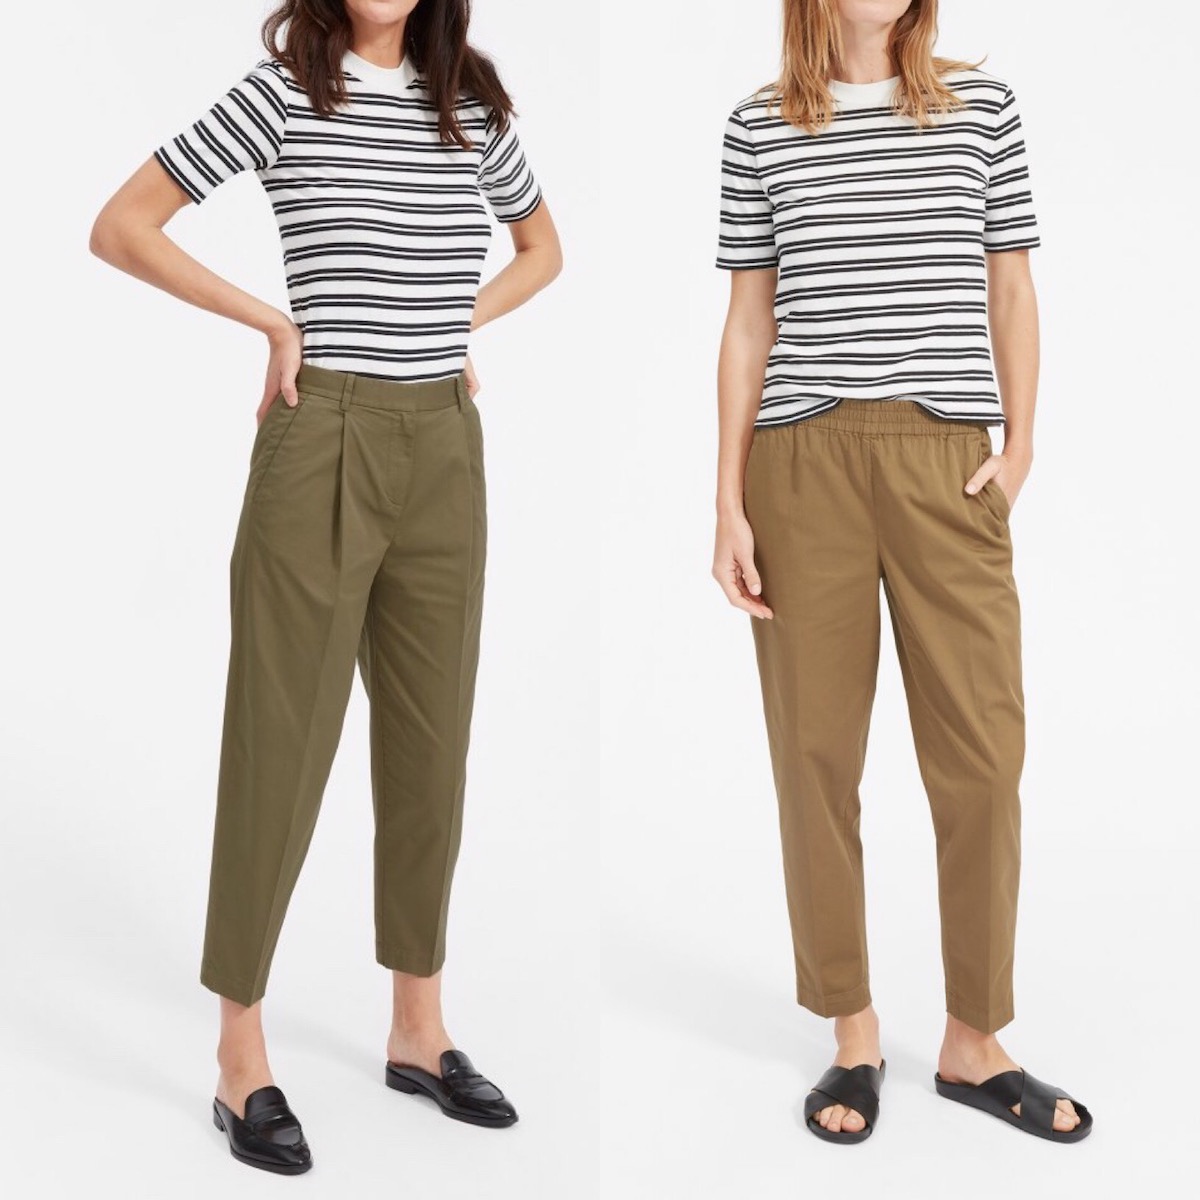 Everlane Slouchy Chino and Easy Chino Review: Models wear striped black and white shirts, olive or brown colored chinos, and black shoes. and chinos